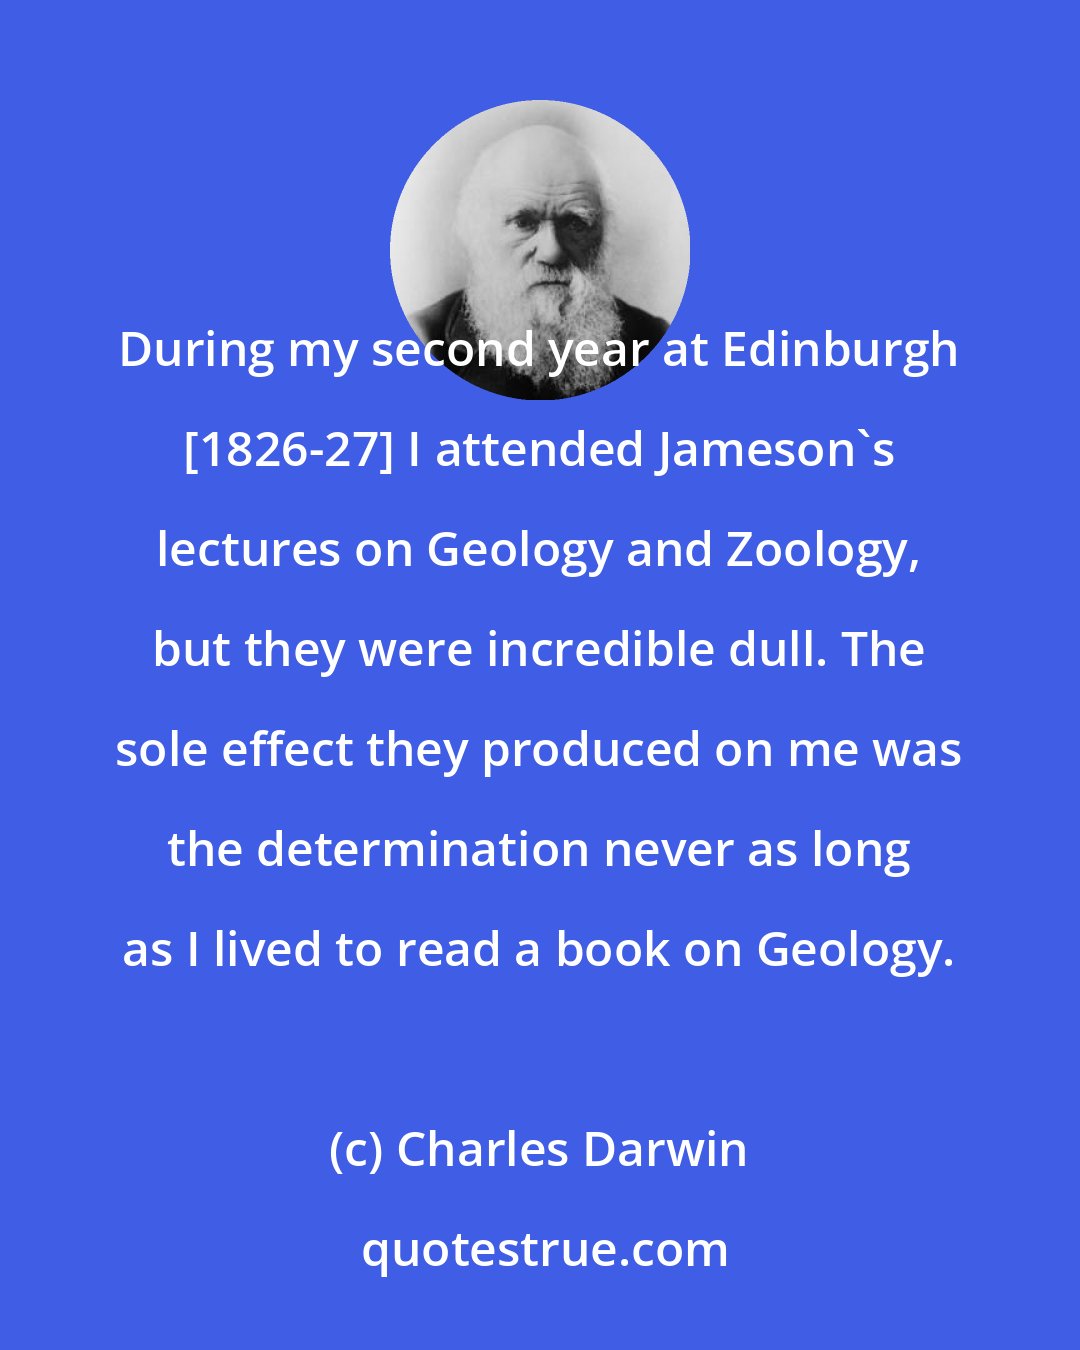 Charles Darwin: During my second year at Edinburgh [1826-27] I attended Jameson's lectures on Geology and Zoology, but they were incredible dull. The sole effect they produced on me was the determination never as long as I lived to read a book on Geology.